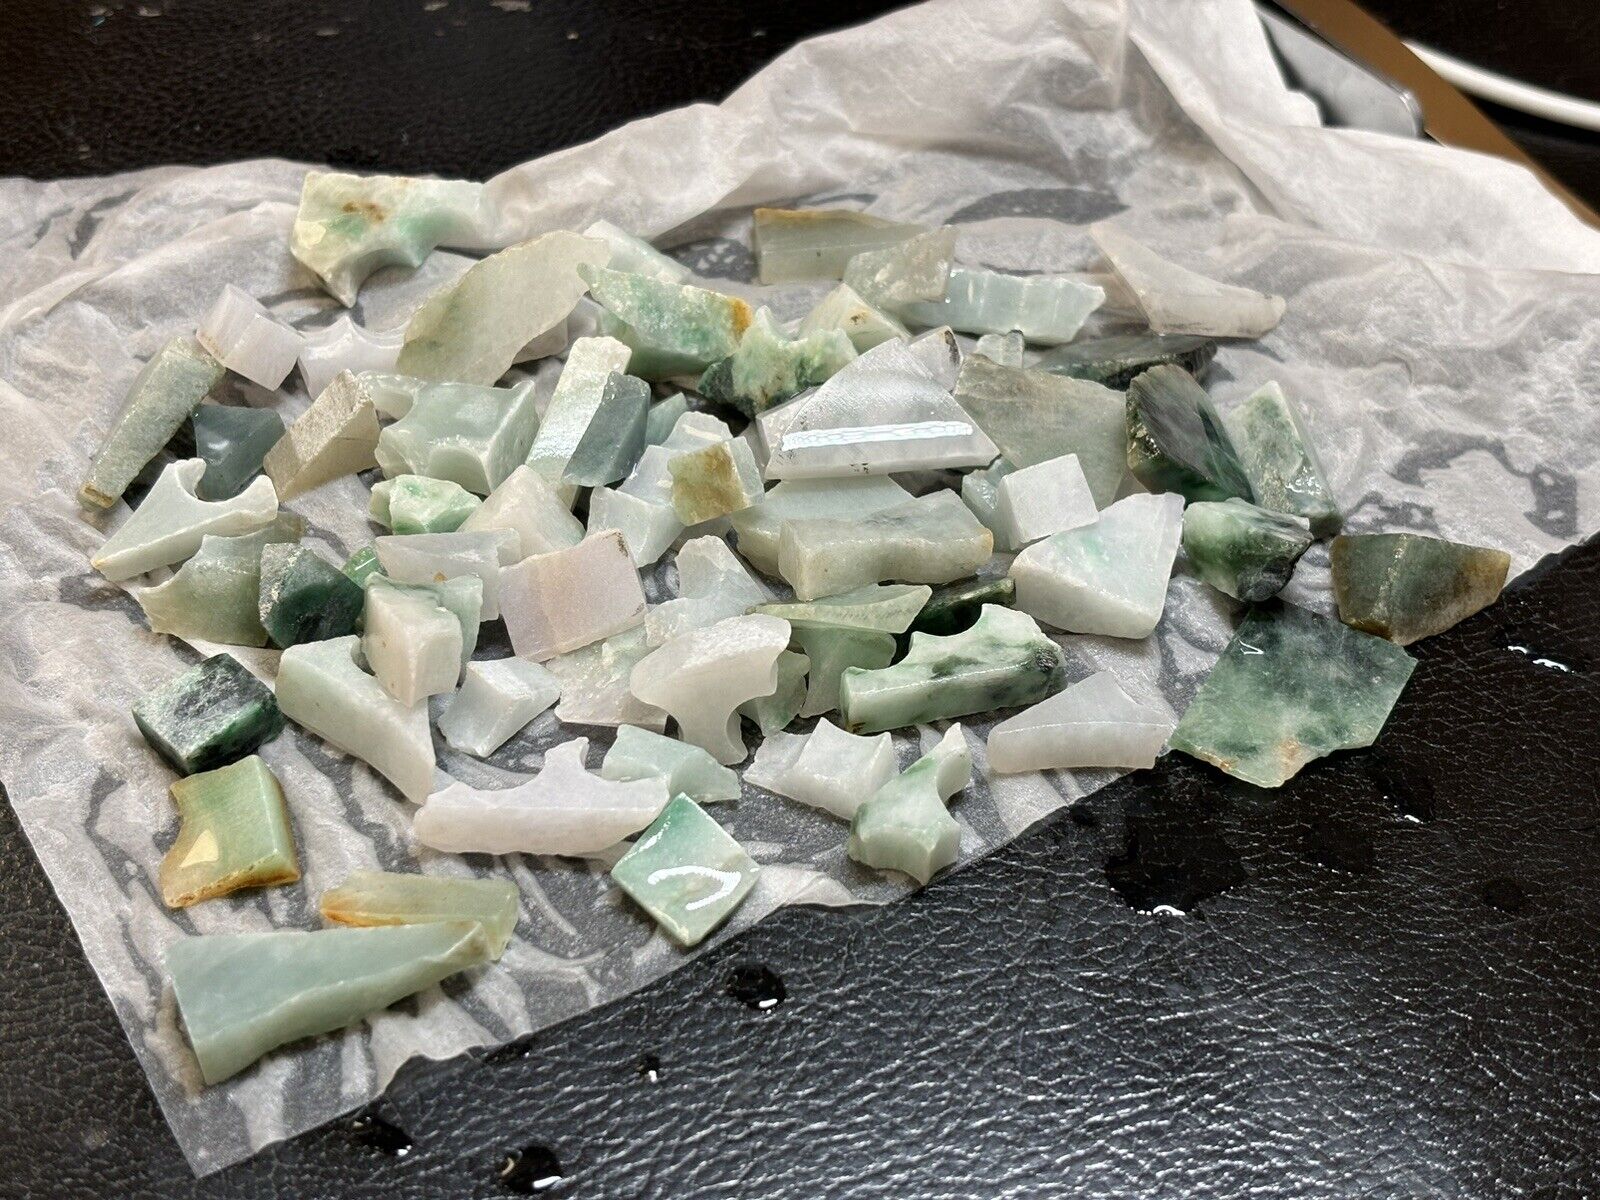 Natural Icy Jadeite Jade Raw Stone From Carving Leftovers 200g Loose Gemstones